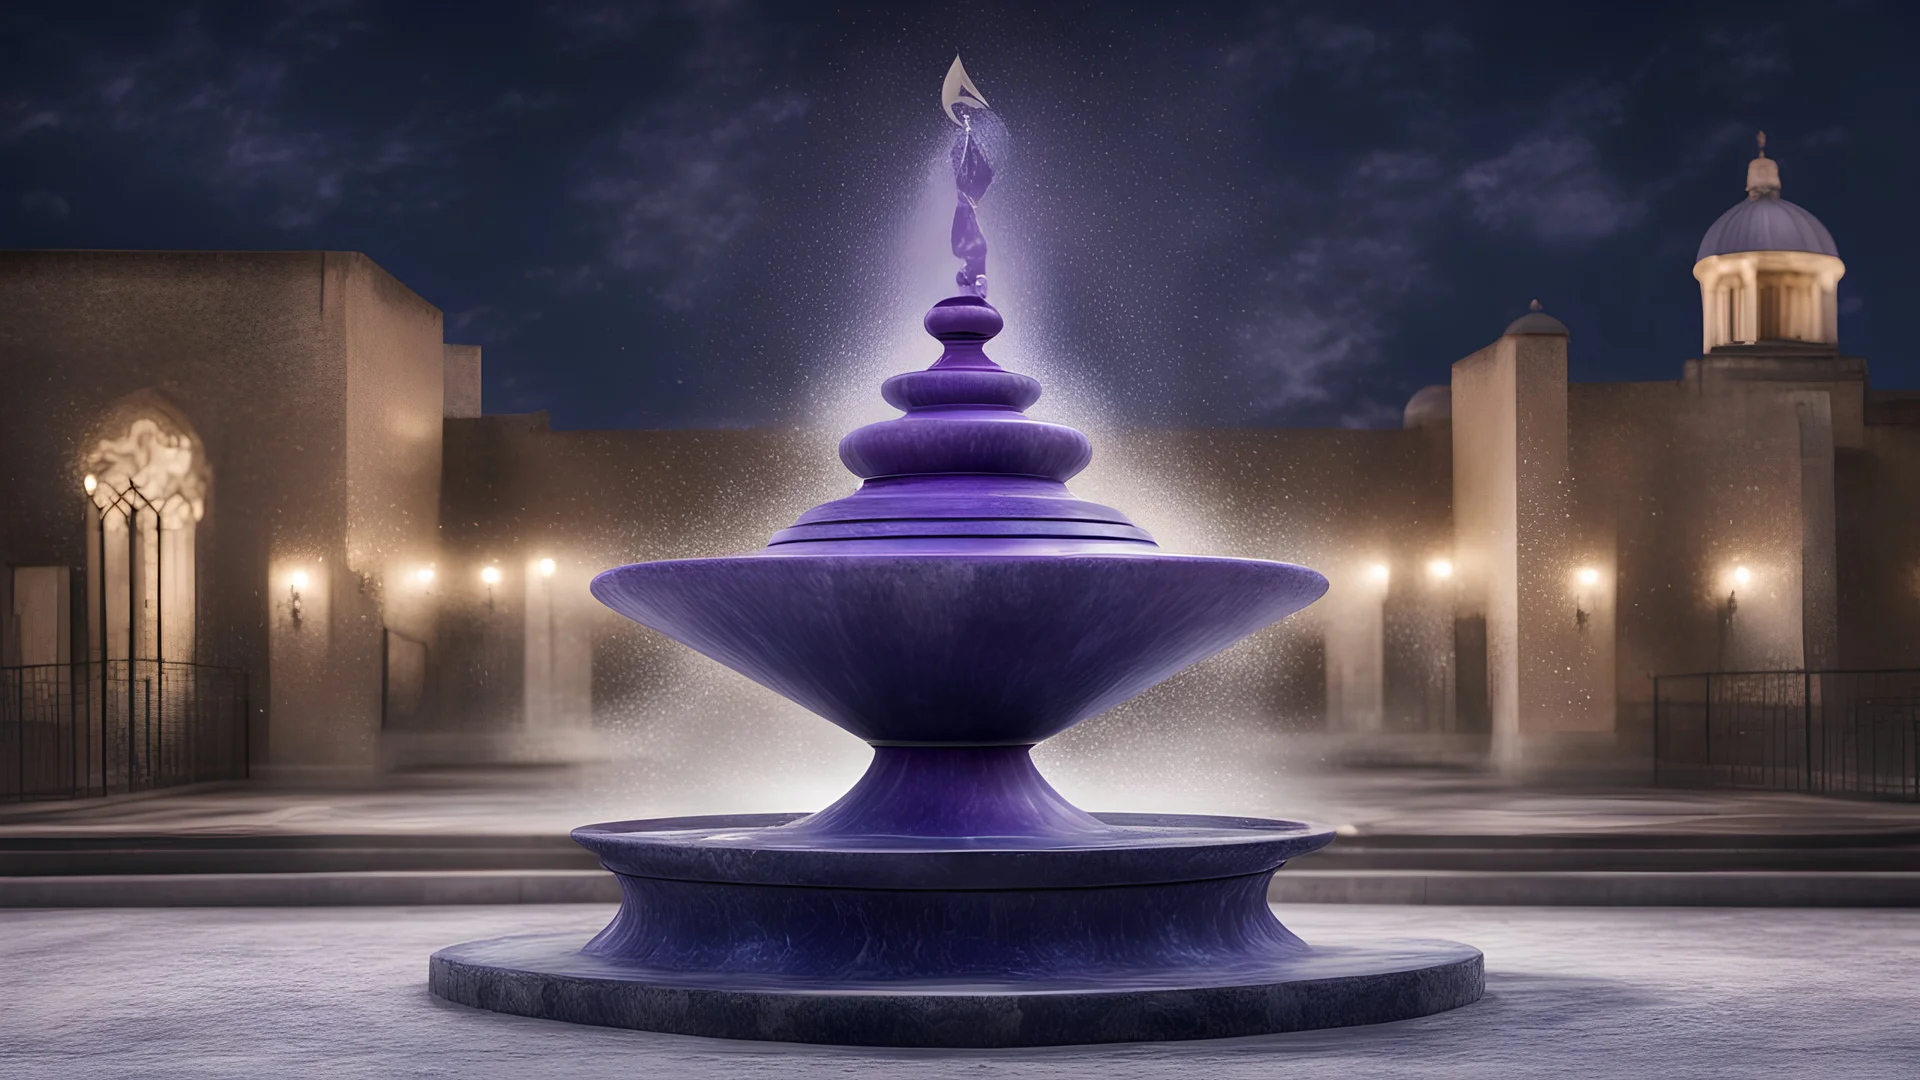 Hyper Realistic Sufi Whirling with Purple & White Islamic Sufi Rustic Grungy outside a navy-blue-marble-fences with a beautiful water fountain at dark night